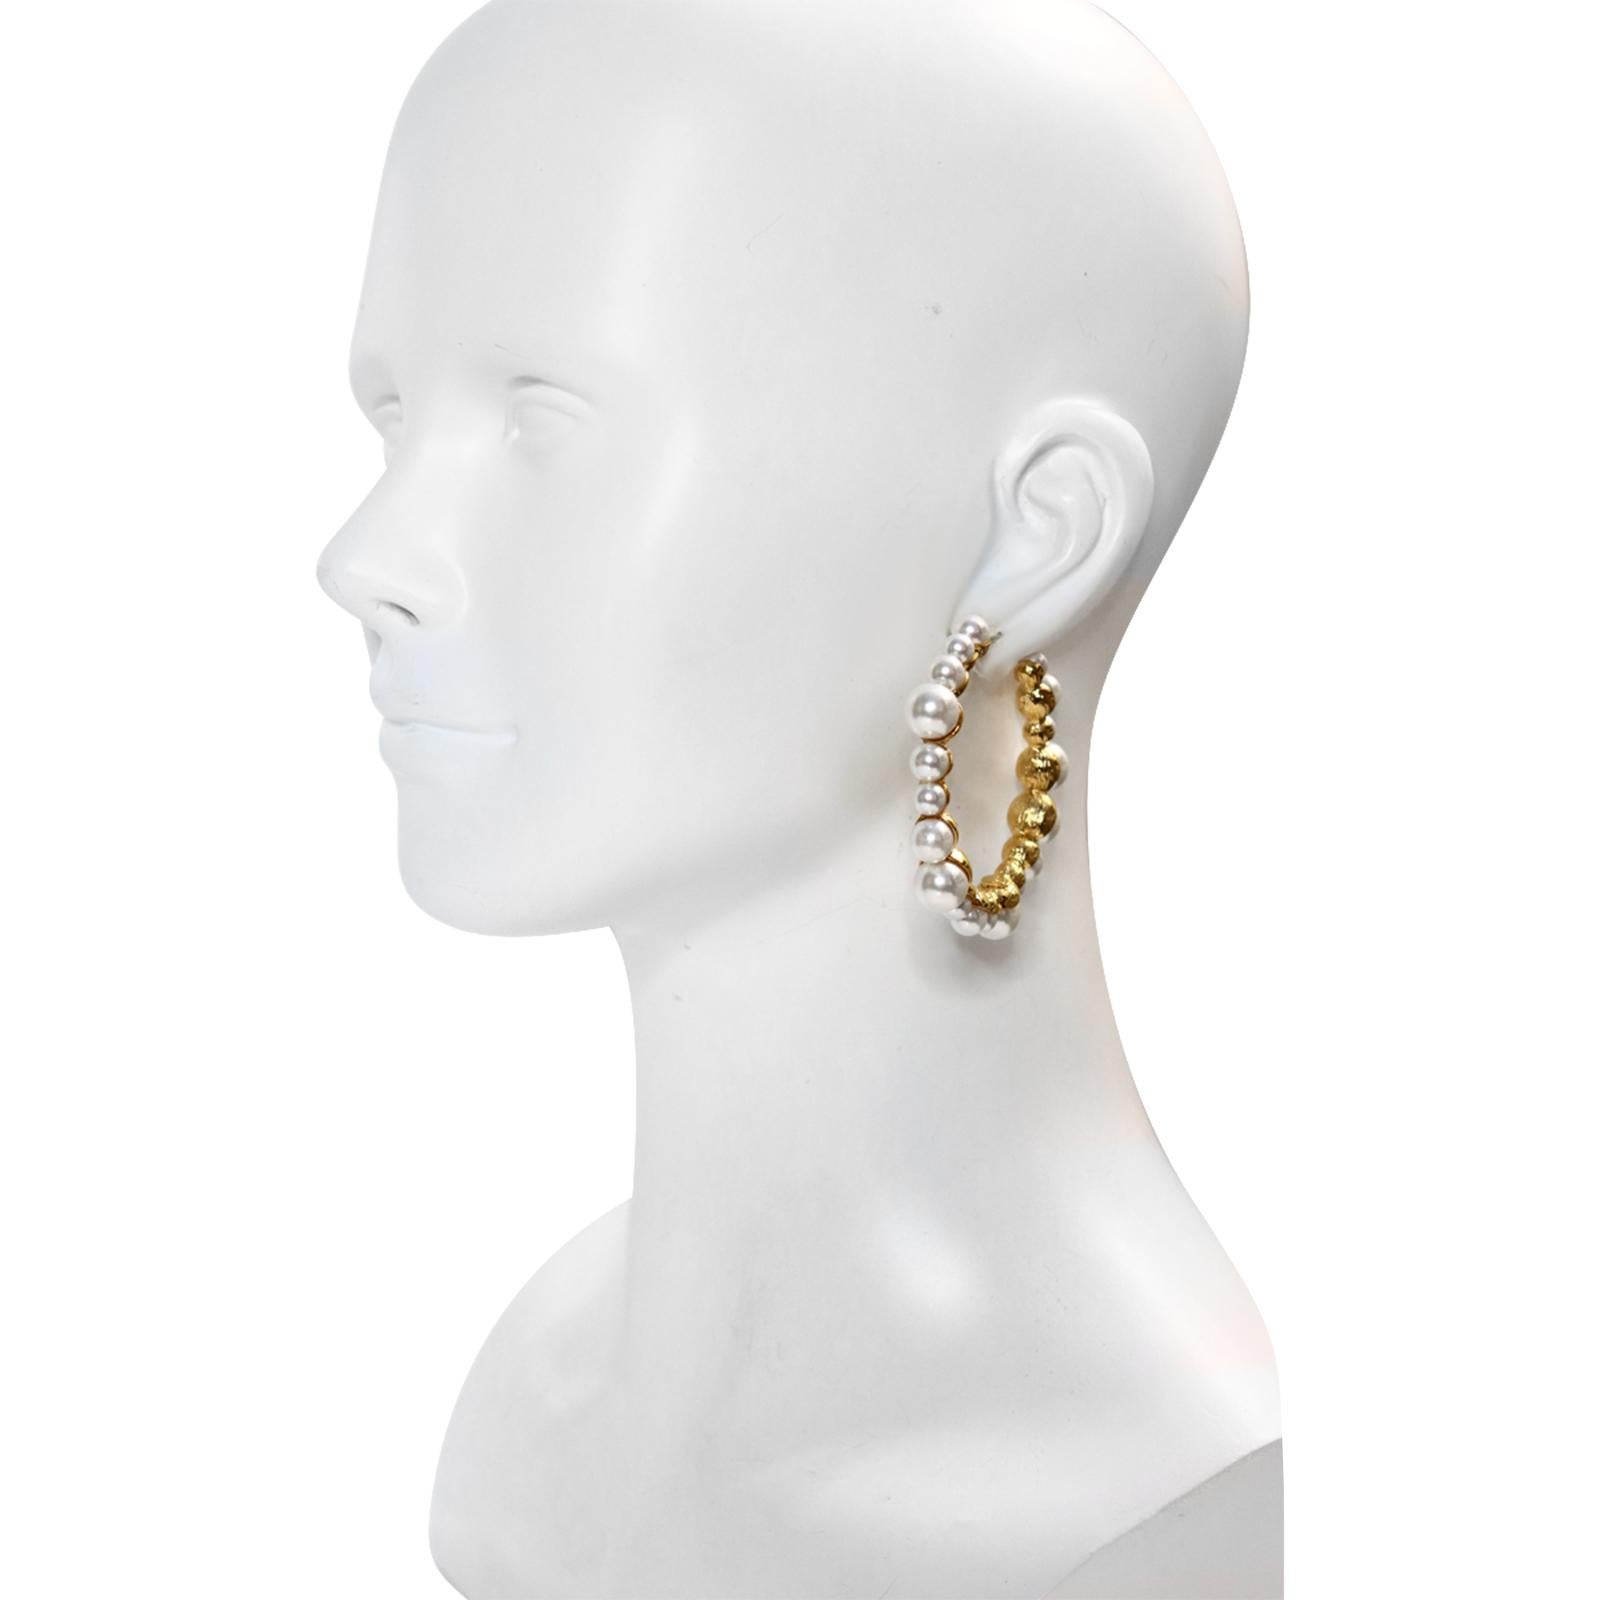 Collectible KJL Gold Hoops with Faux Pearls Circa 2000s In Excellent Condition For Sale In New York, NY